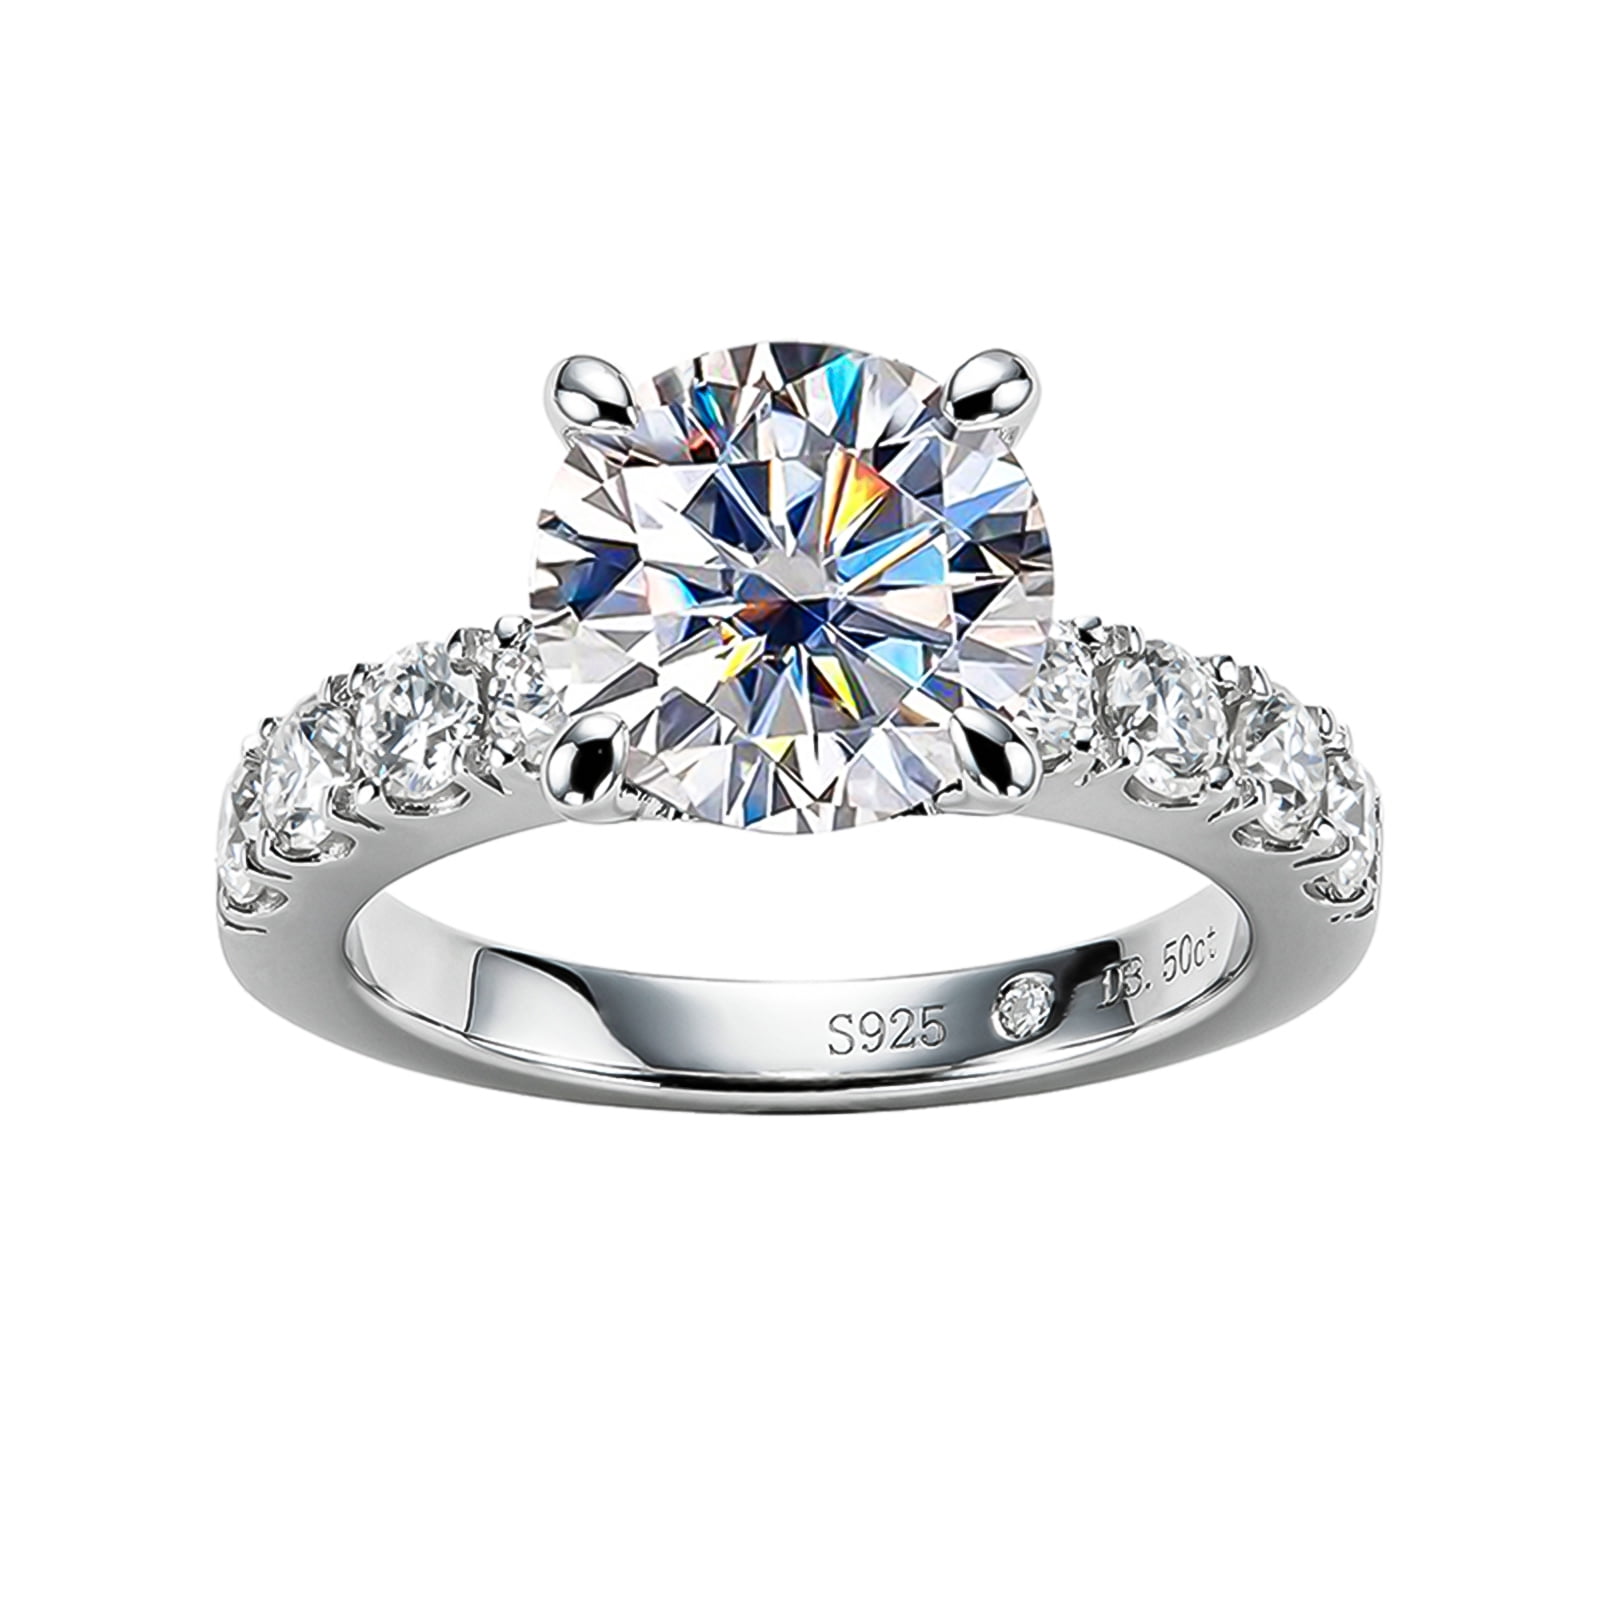 Heart Shaped Engagement Rings in Engagement Rings - Walmart.com